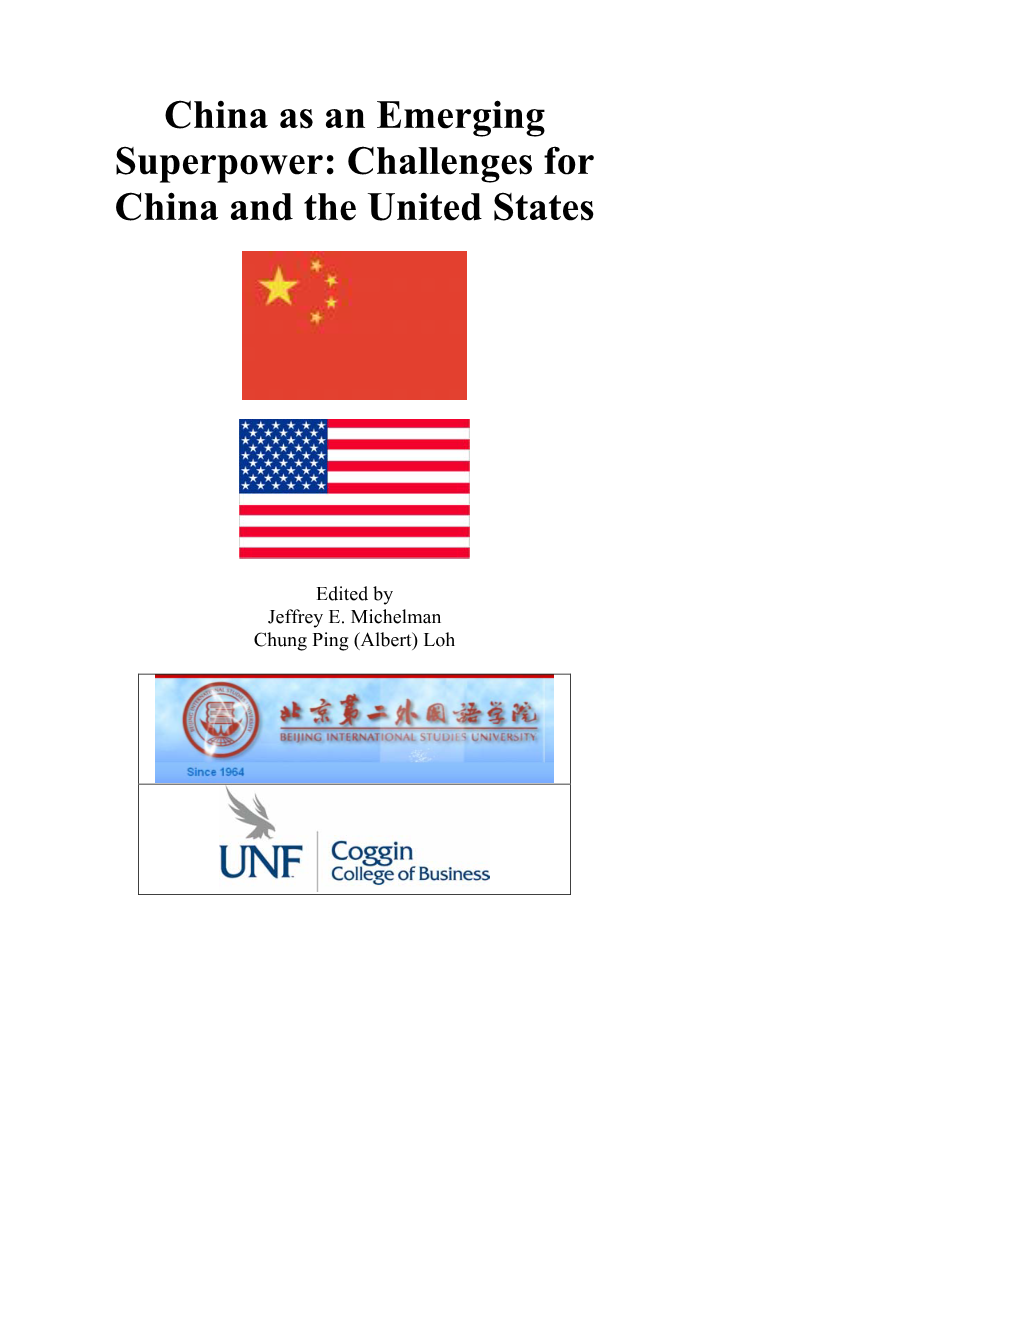 Challenges for China and the United States